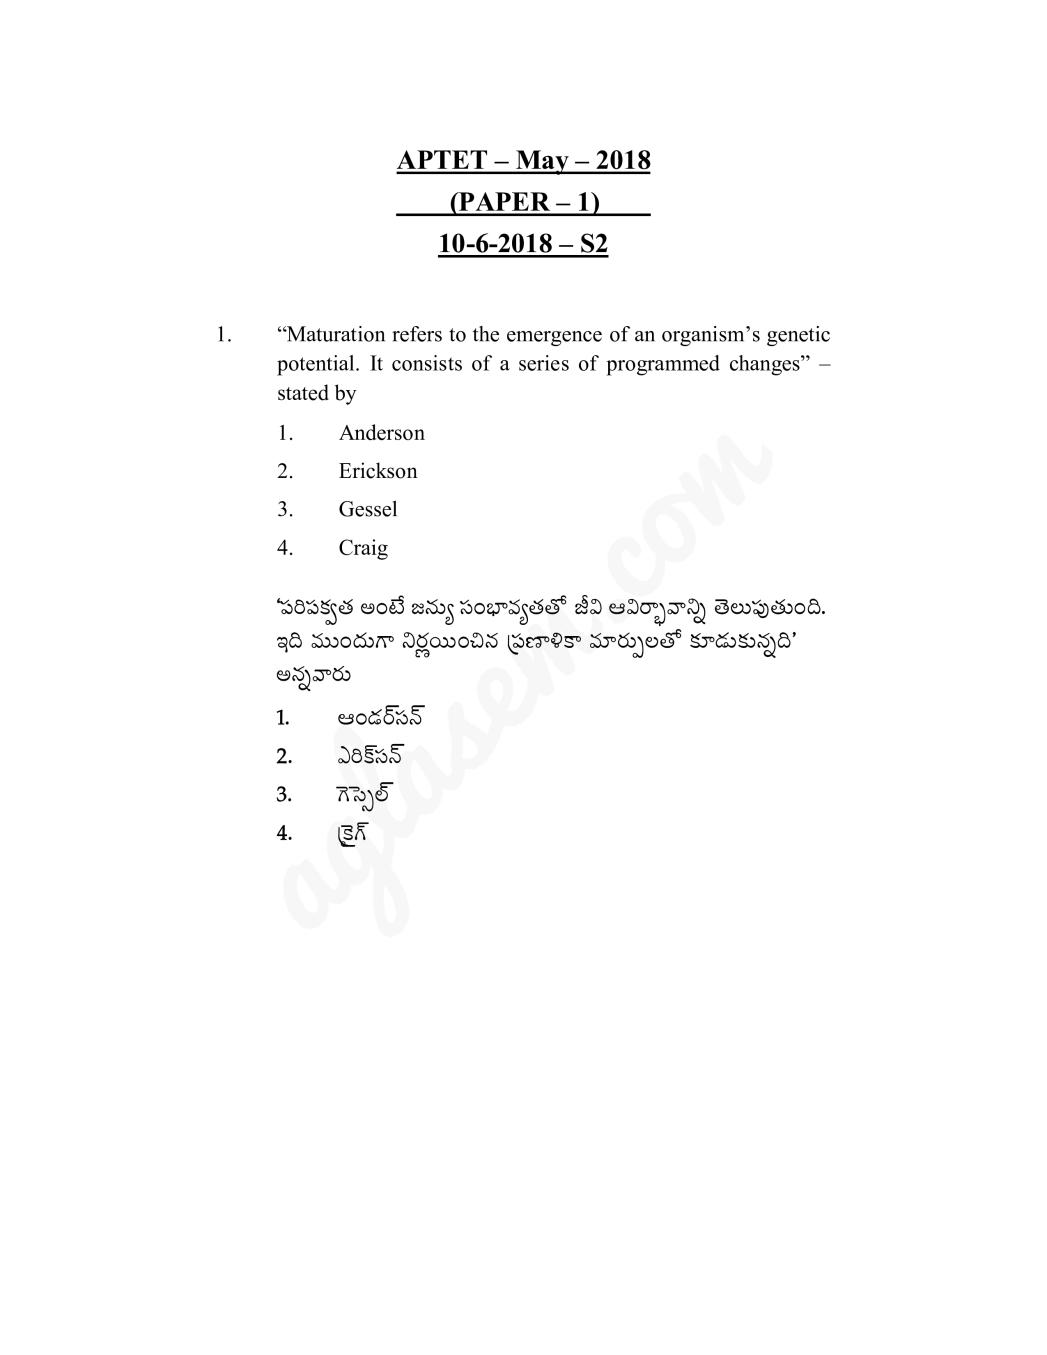 APTET Question Paper with Answers 10 Jun 2018 Paper 1 (Shift 2) - Page 1